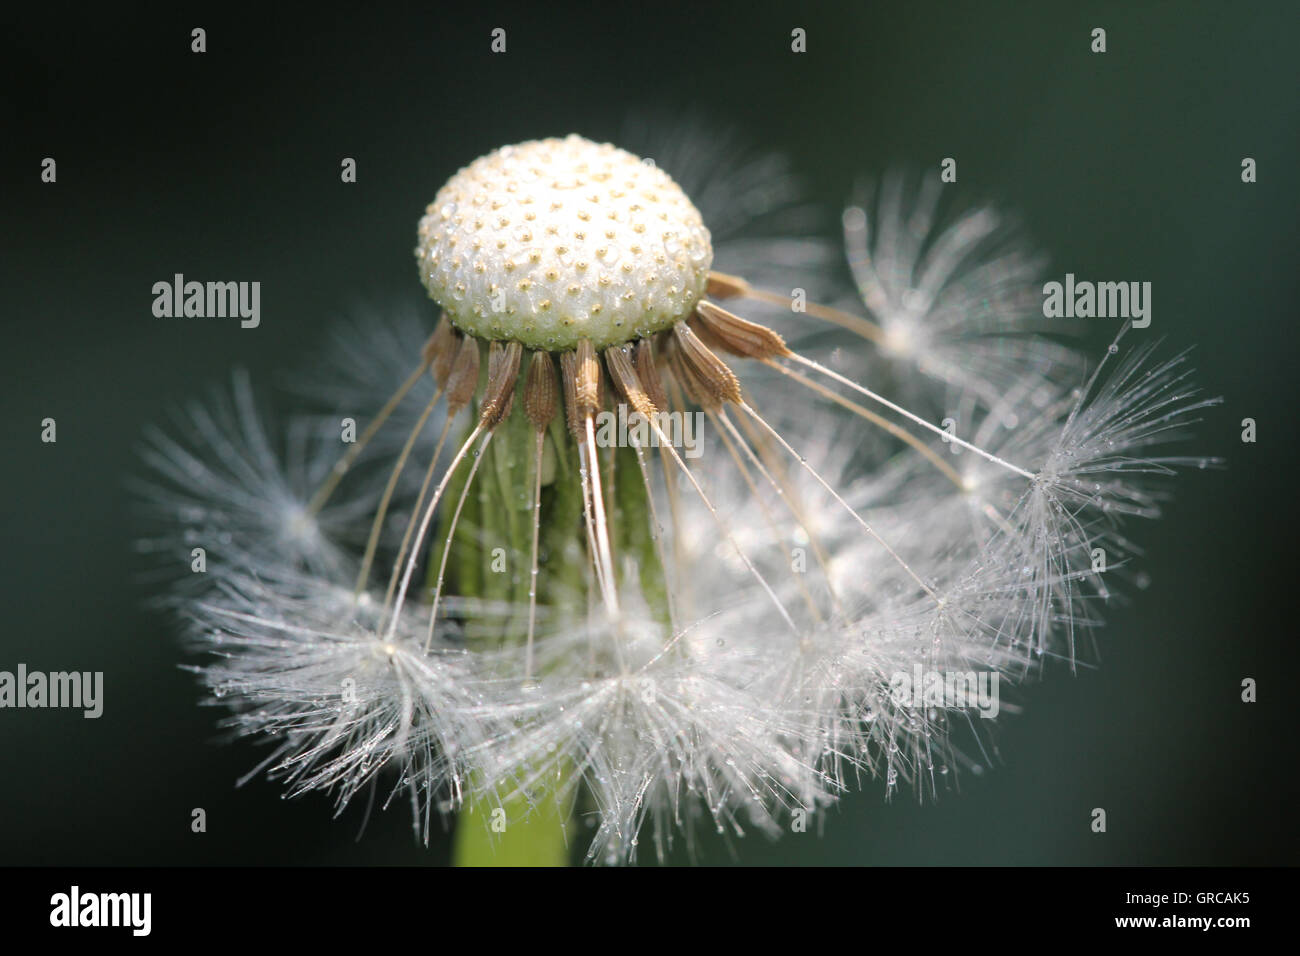 Charming Dandelion As A Featherlight Tutu In Front Of Dark Background Stock Photo